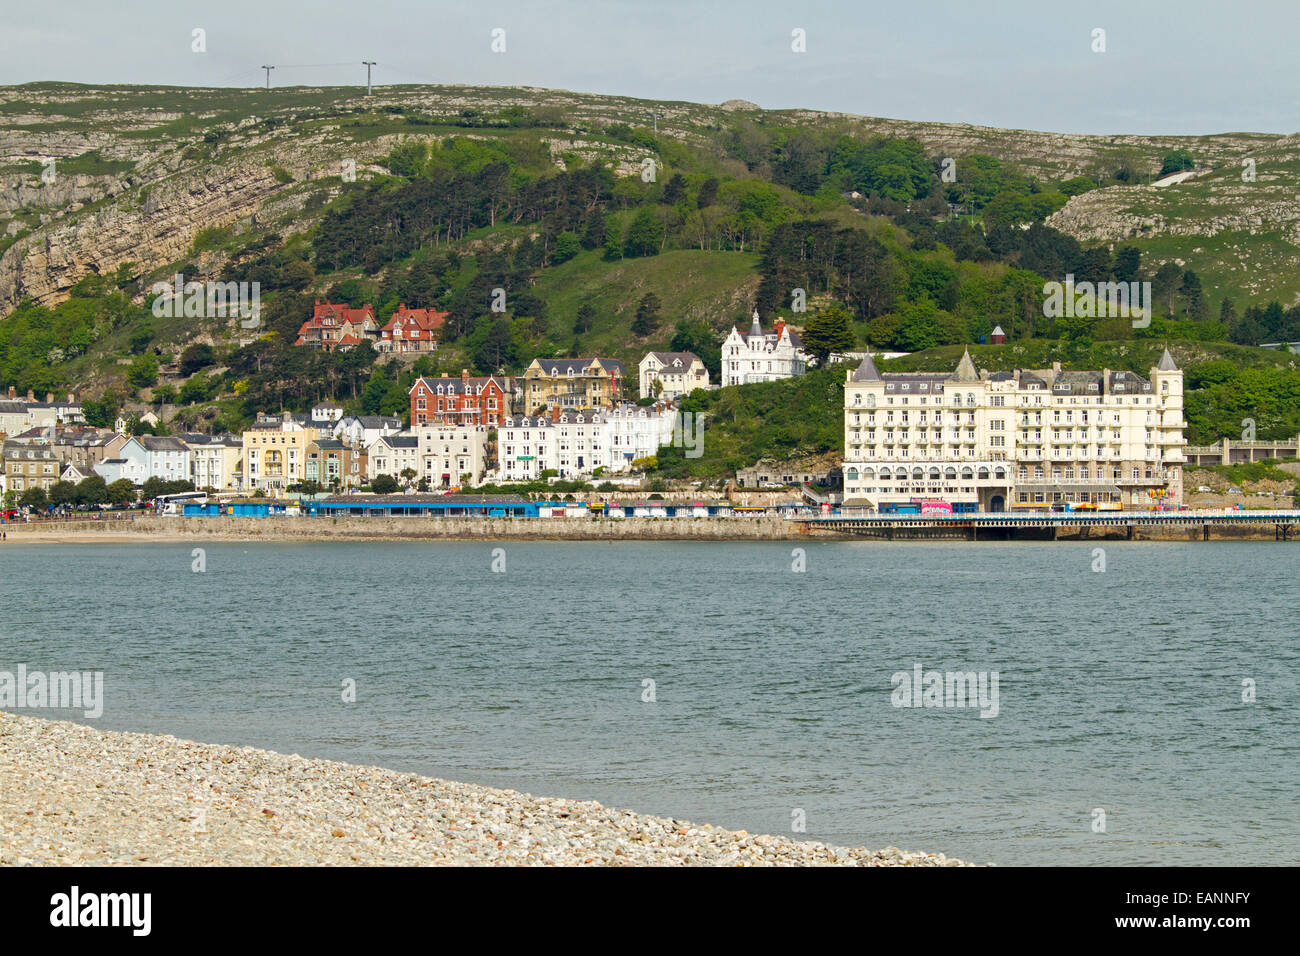 Hotels & other buildings by the beach & at foot of large hill - Great Orme - at popular holiday resort town of Llandudno, Wales Stock Photo